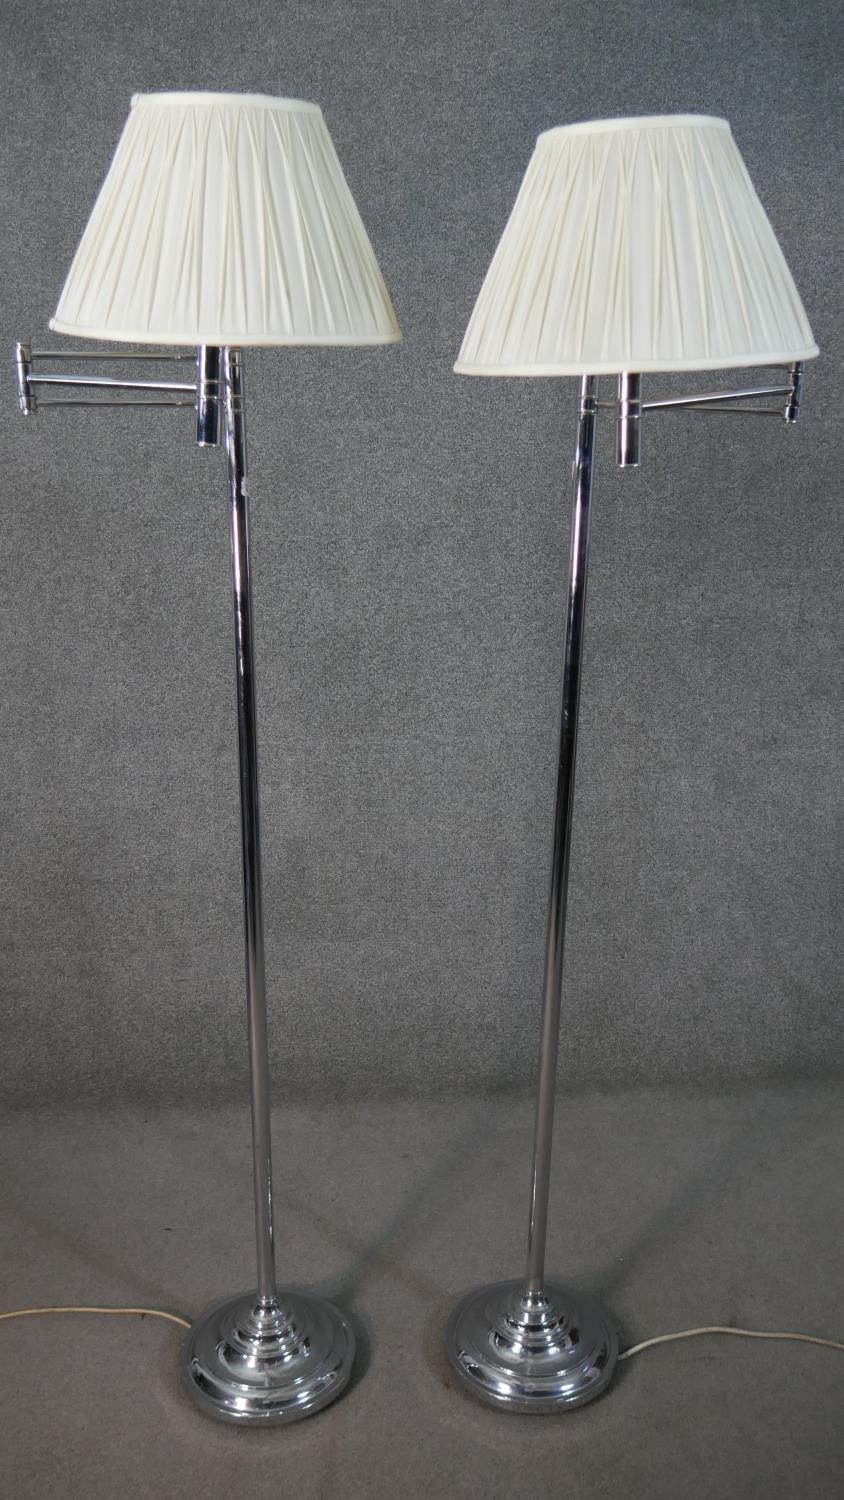 K&L Belysning Co, Denmark, a pair of circa 1960s adjustable chrome reading lamps, with white pleated